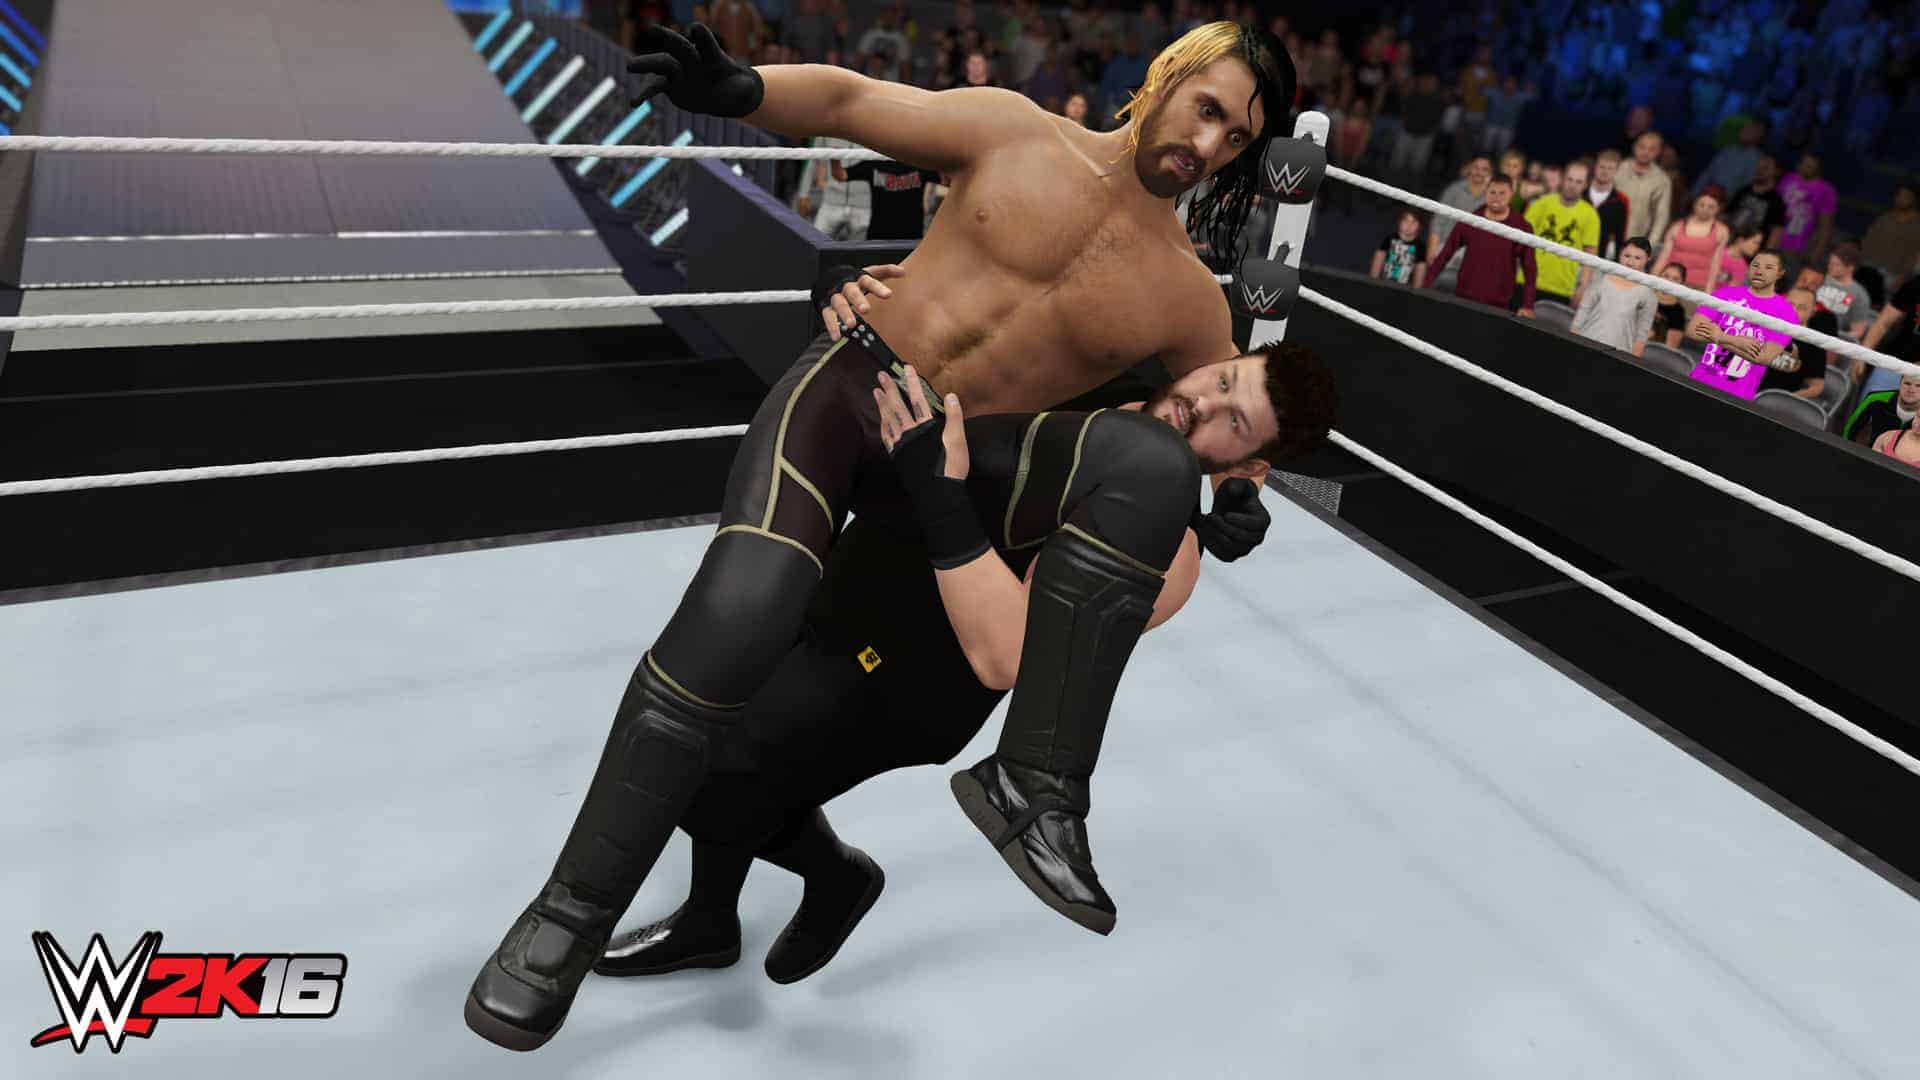 Download WWE 2K16 Game For PC Full Version